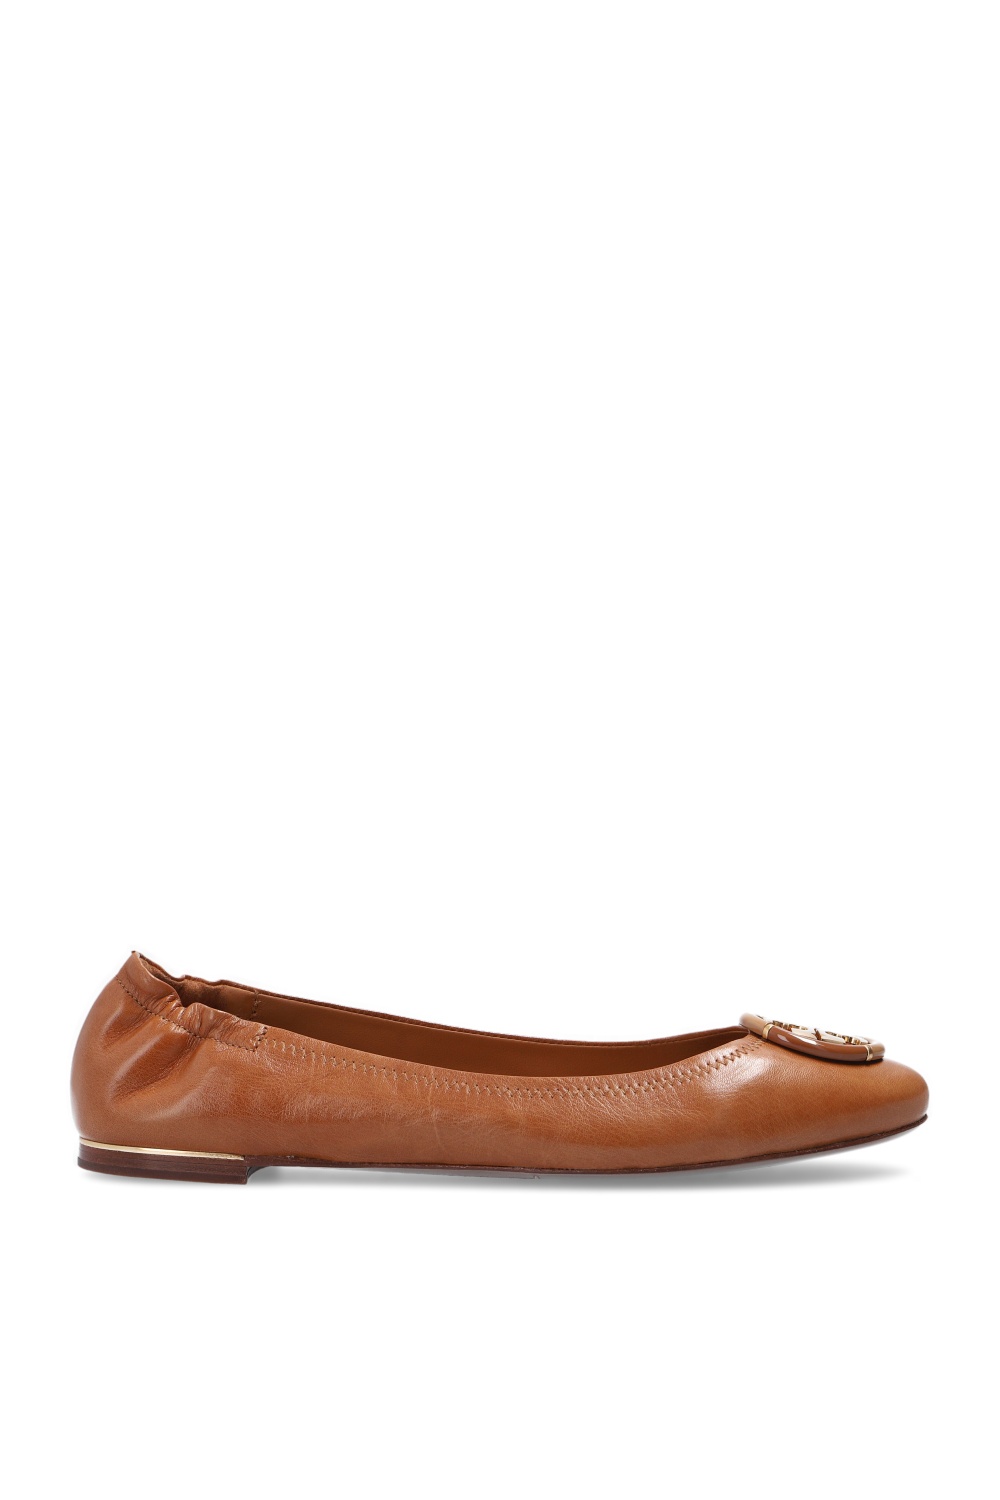 Brown Leather ballet flats with logo Tory Burch - Vitkac GB